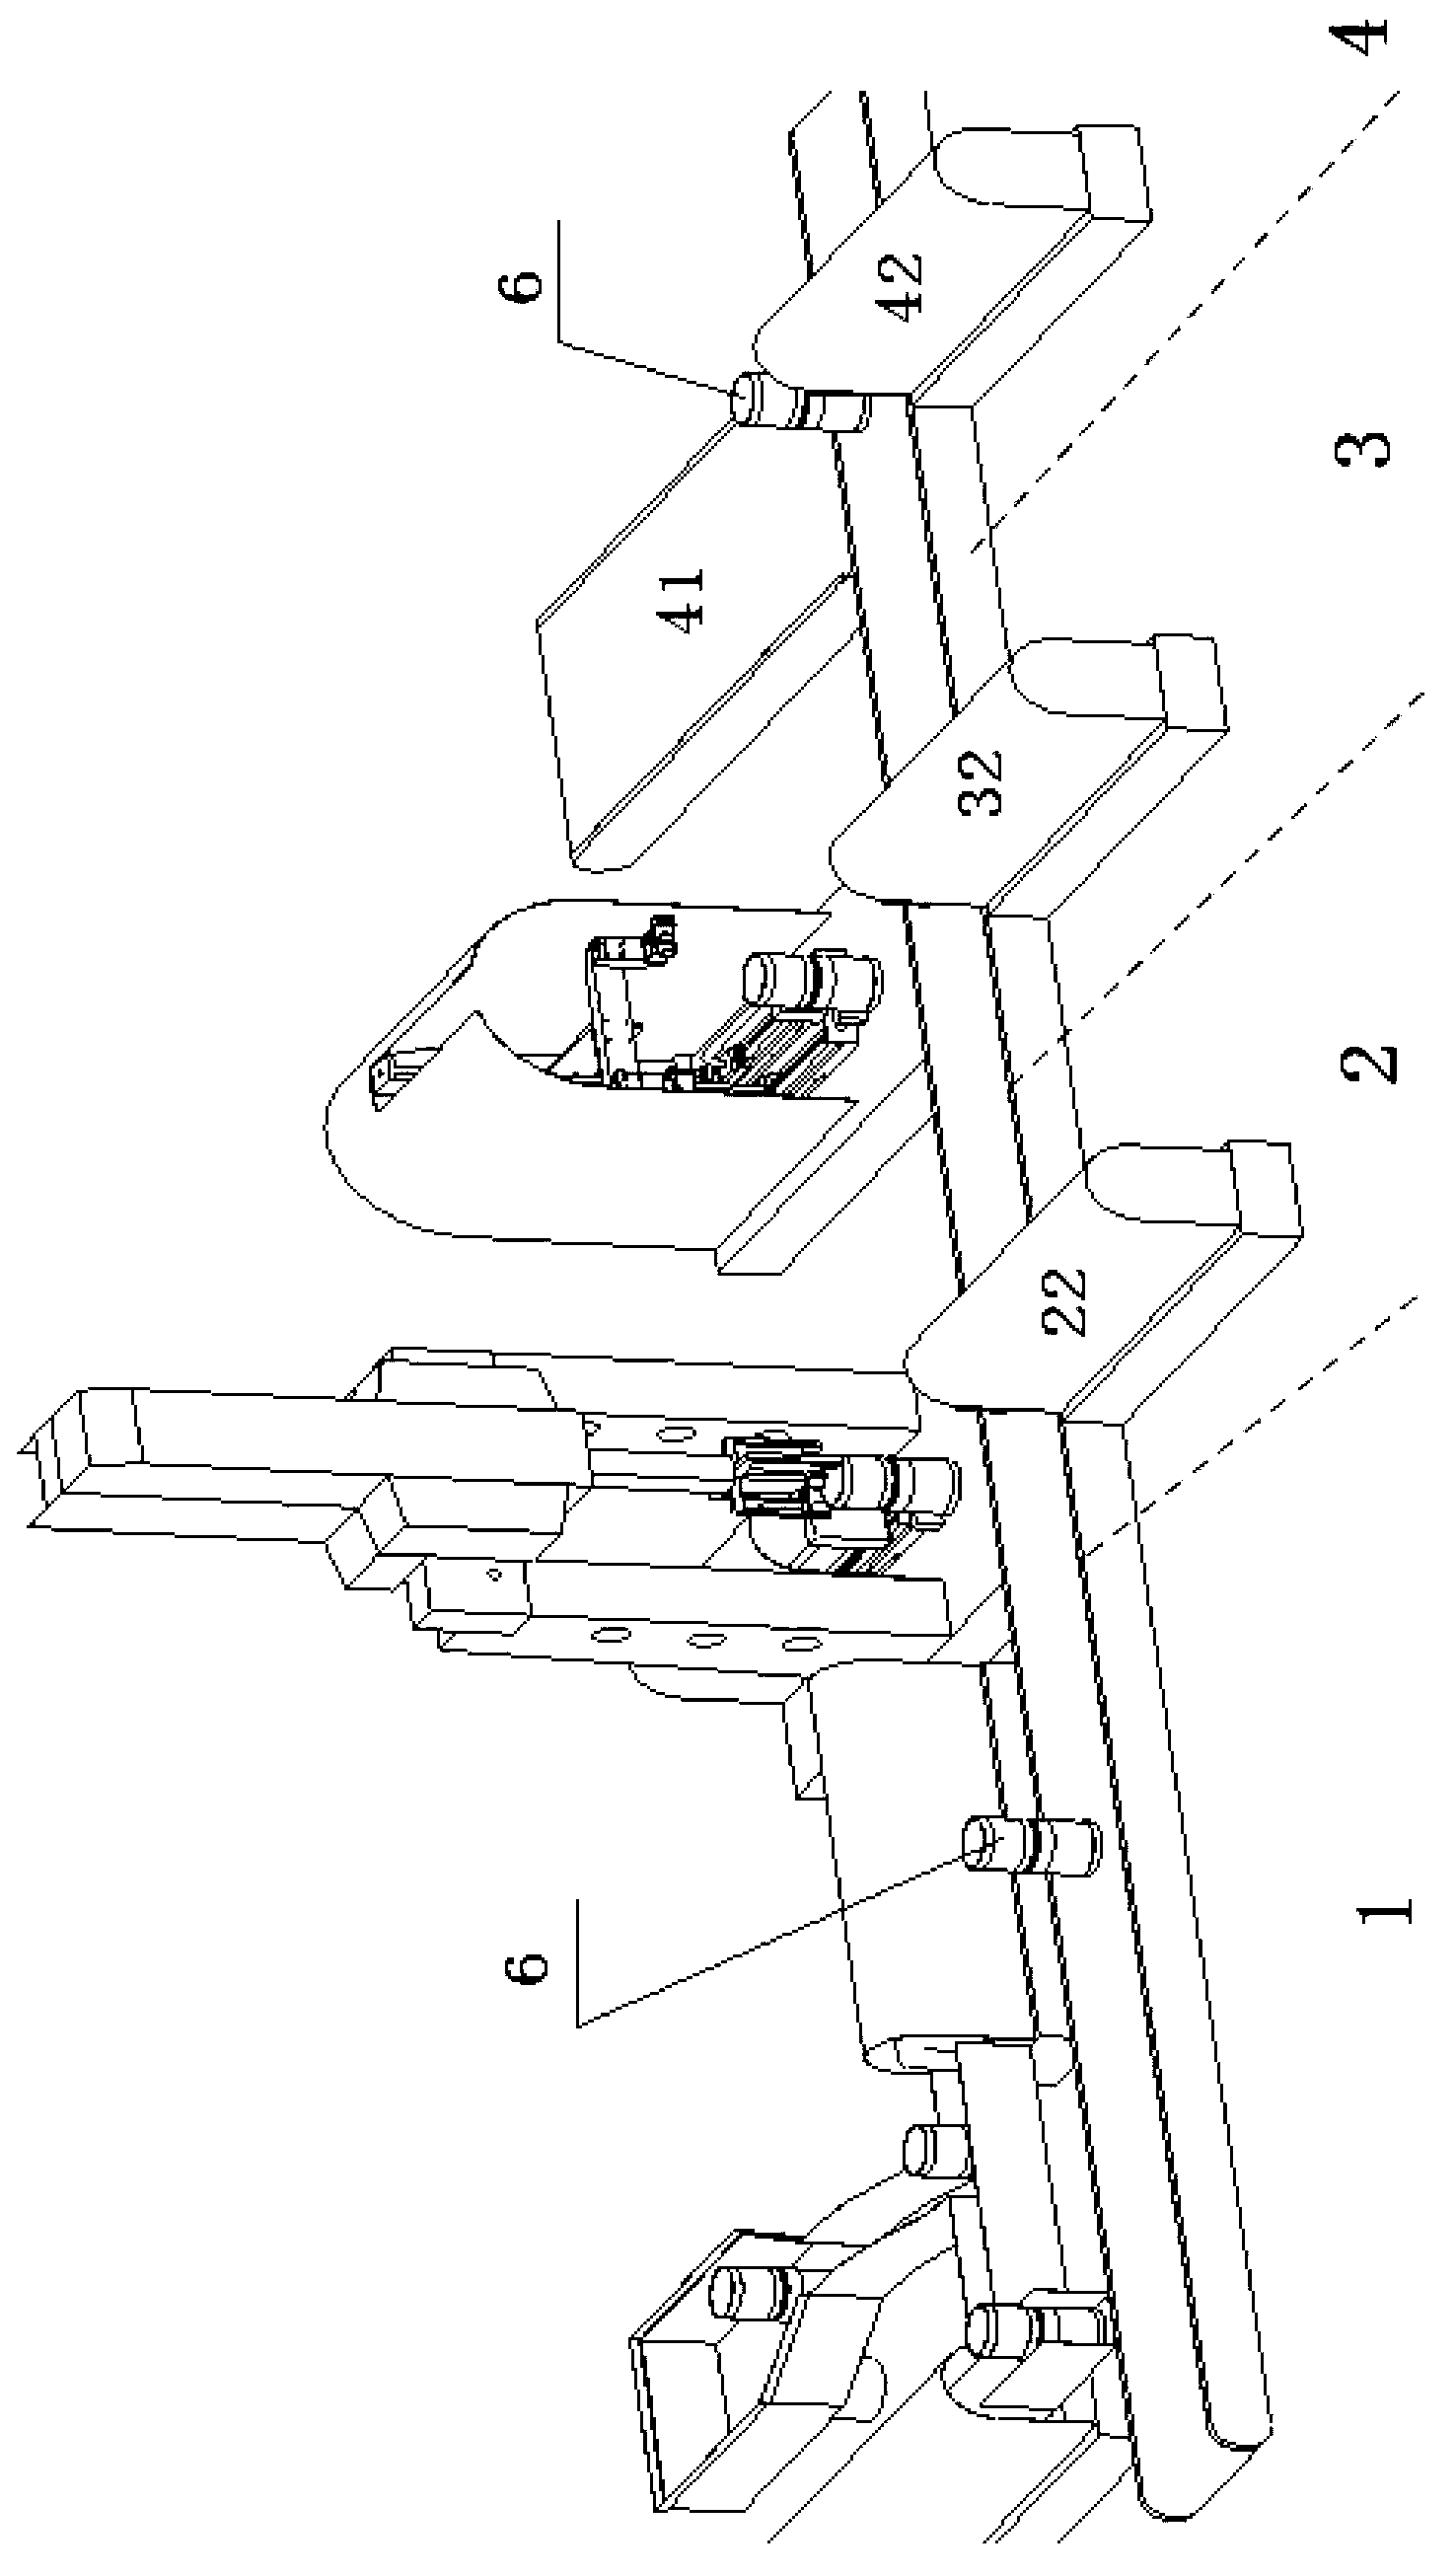 Multi-parameter field automatic measuring and sorting system